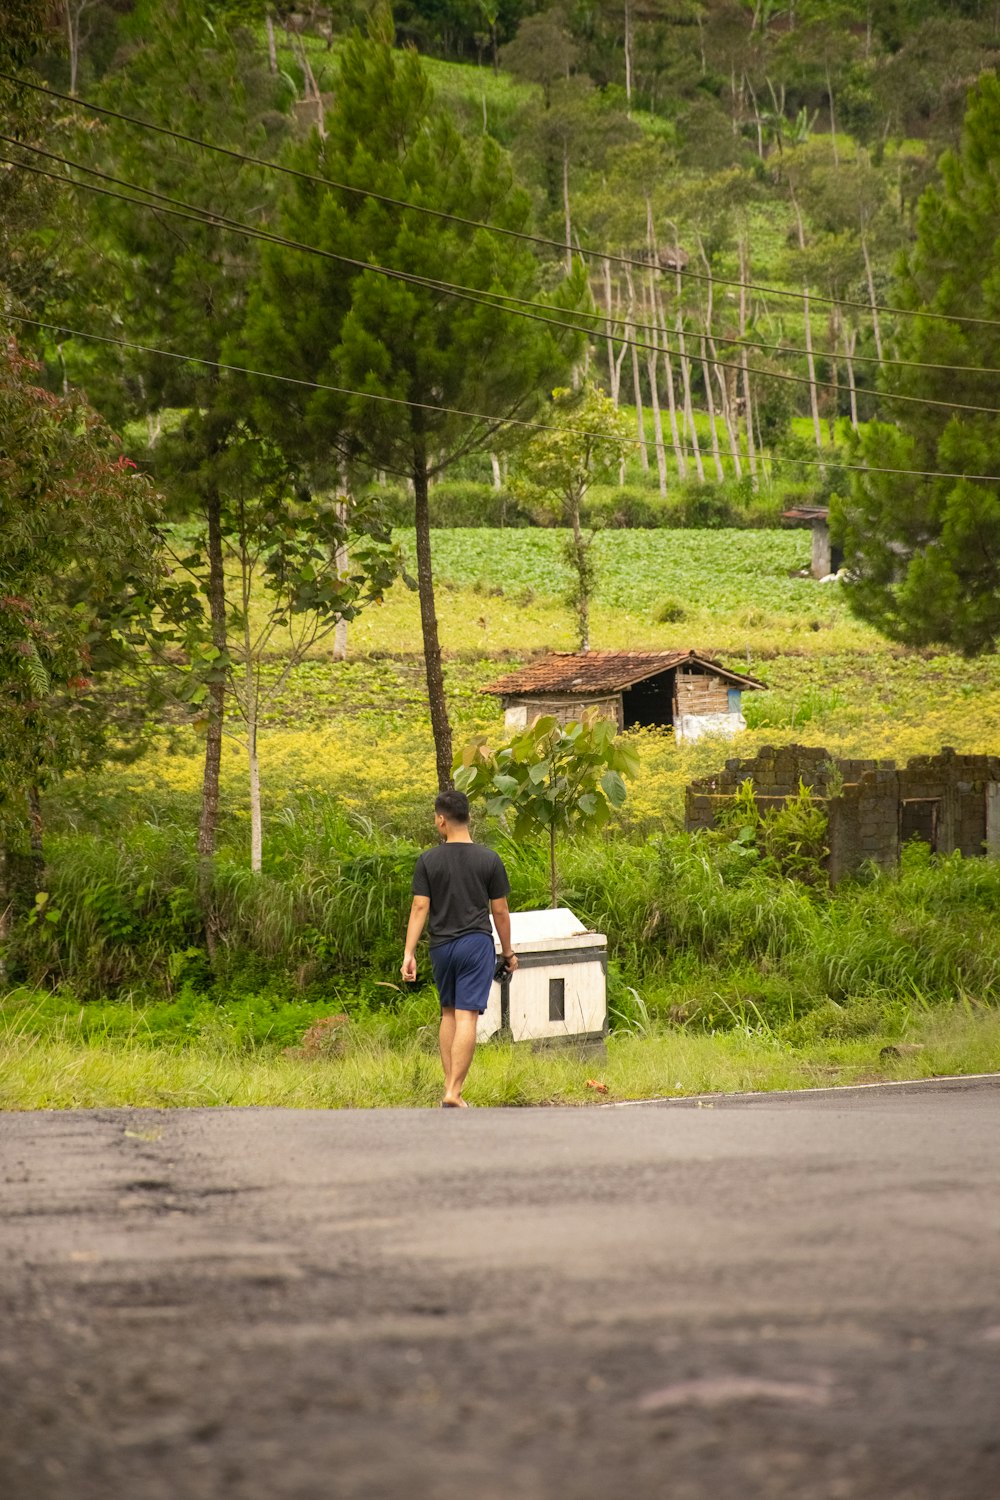 a man walking down the road carrying a cooler